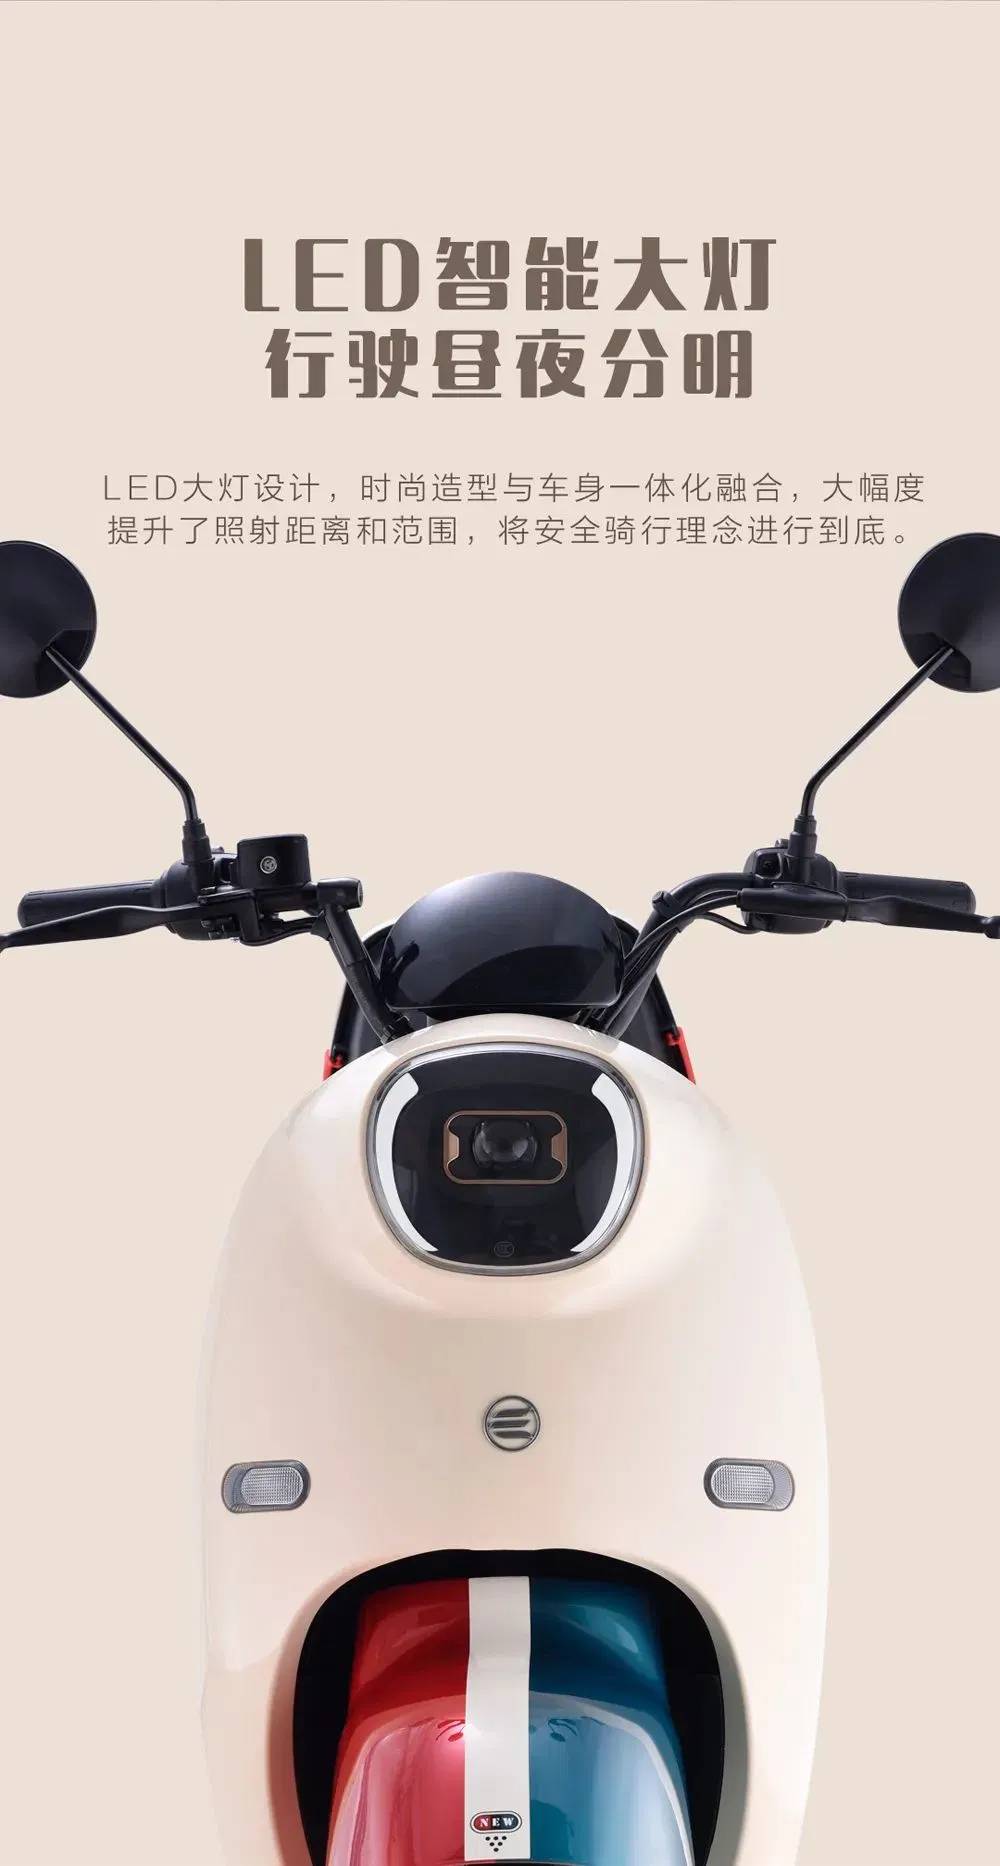 Saige Fashionable Electric Bike 1000W Scooter for Women Long Range Vintage Motorcycle